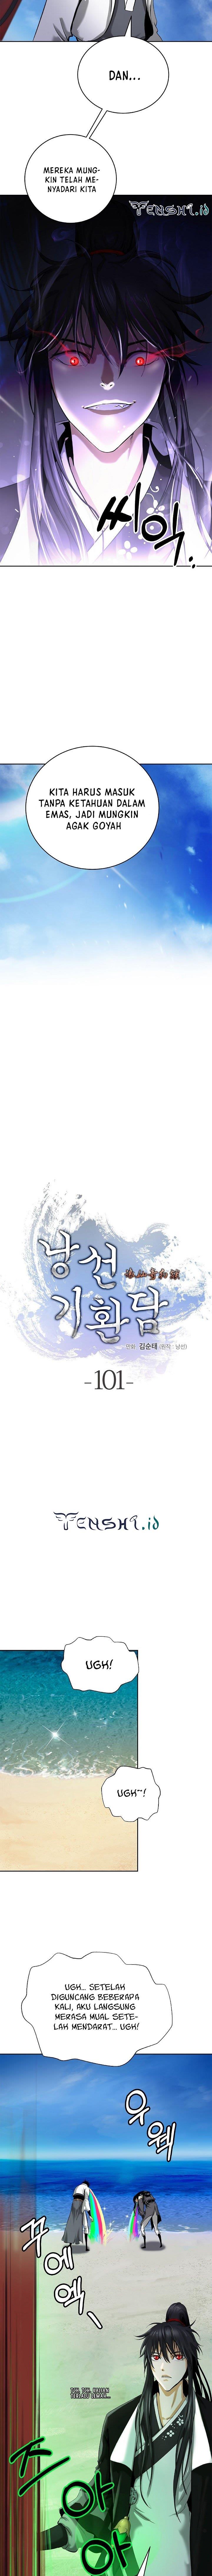 Cystic Story Chapter 101